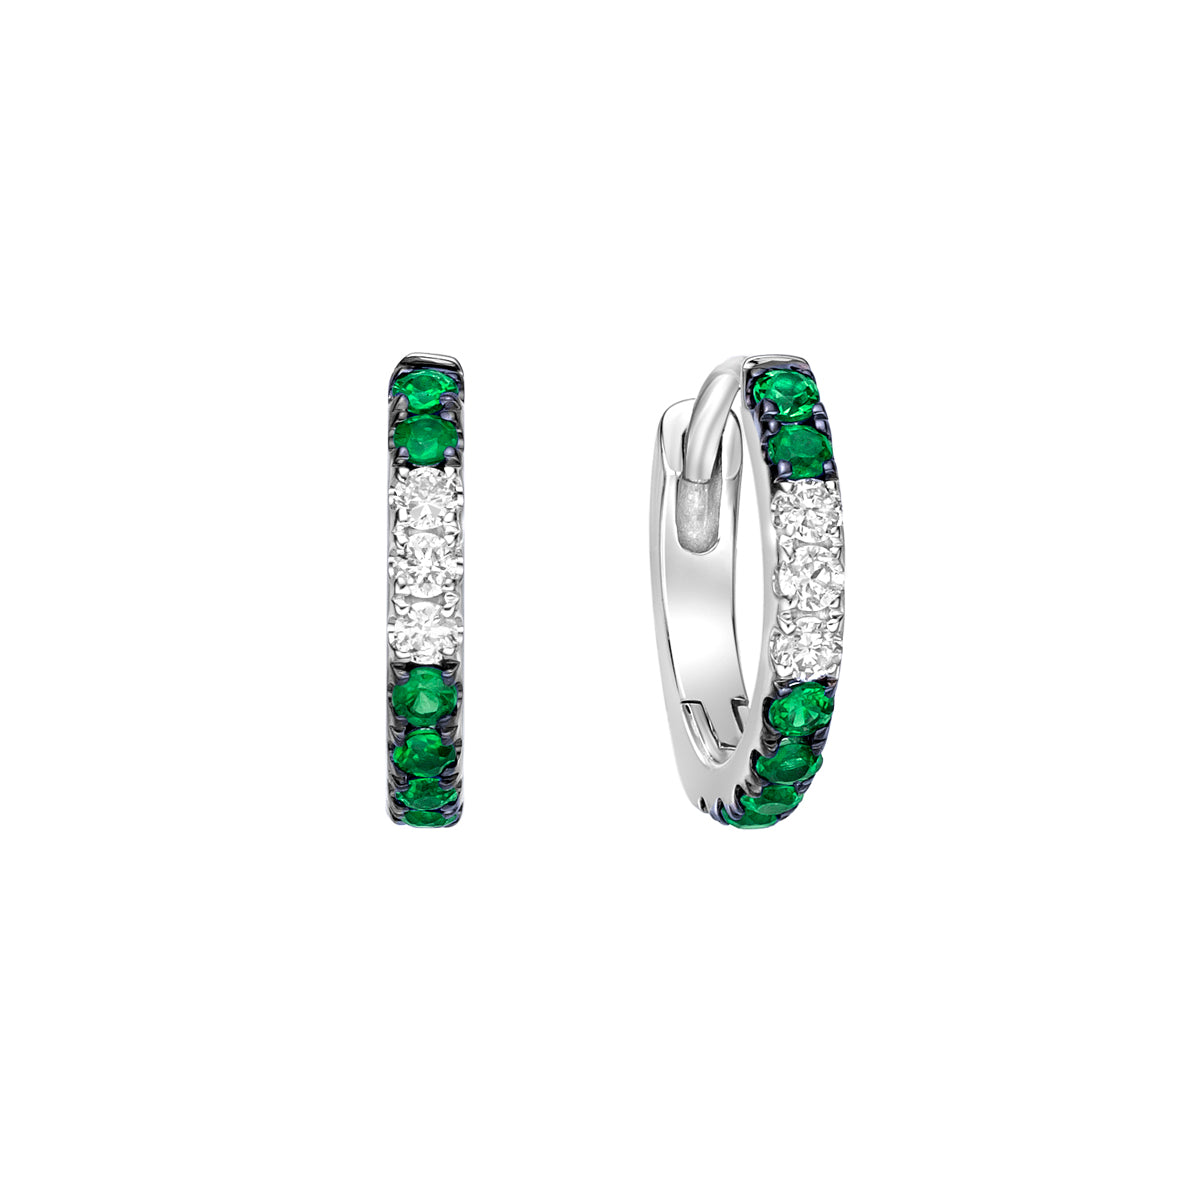 10K White Gold Classic Emerald Hoop Earrings with Diamond Accent